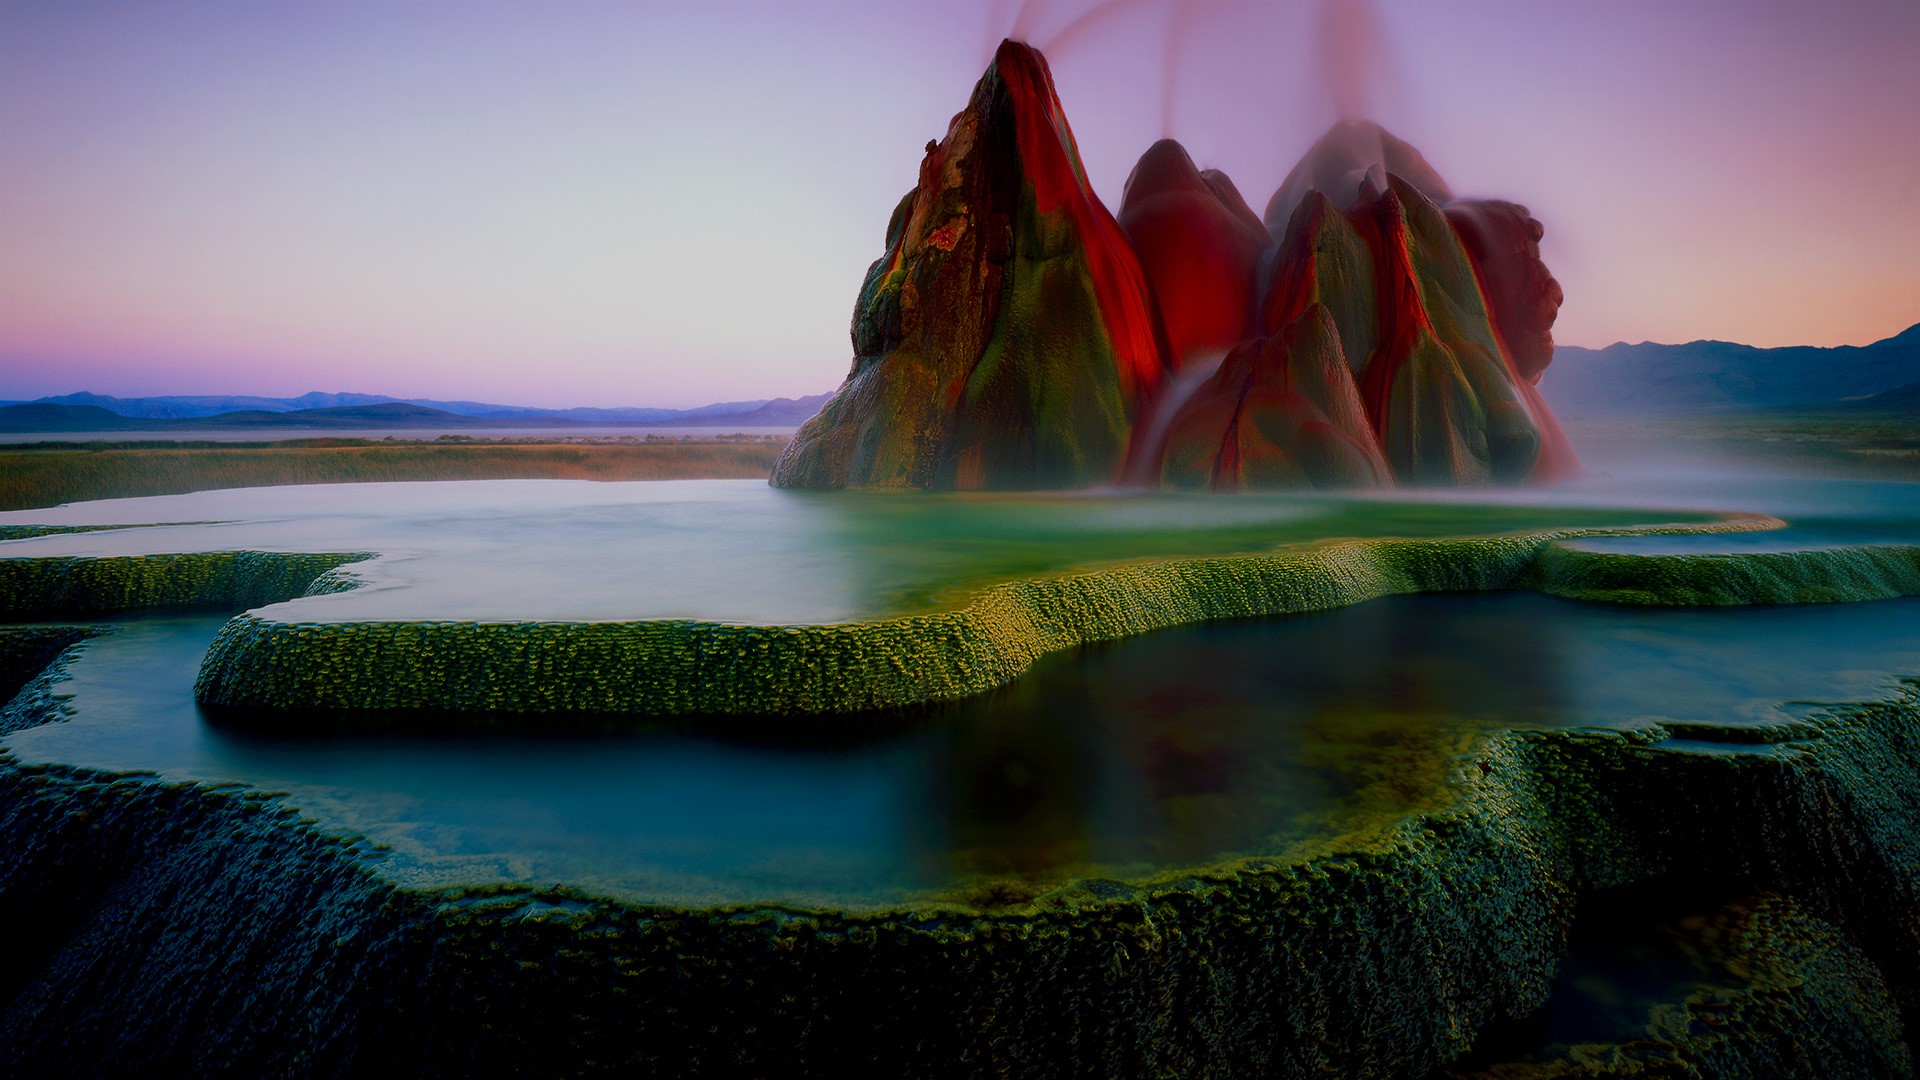 General 1920x1080 mountains nature landscape sky water moss rocks plants sunset Fly Geyser Nevada USA